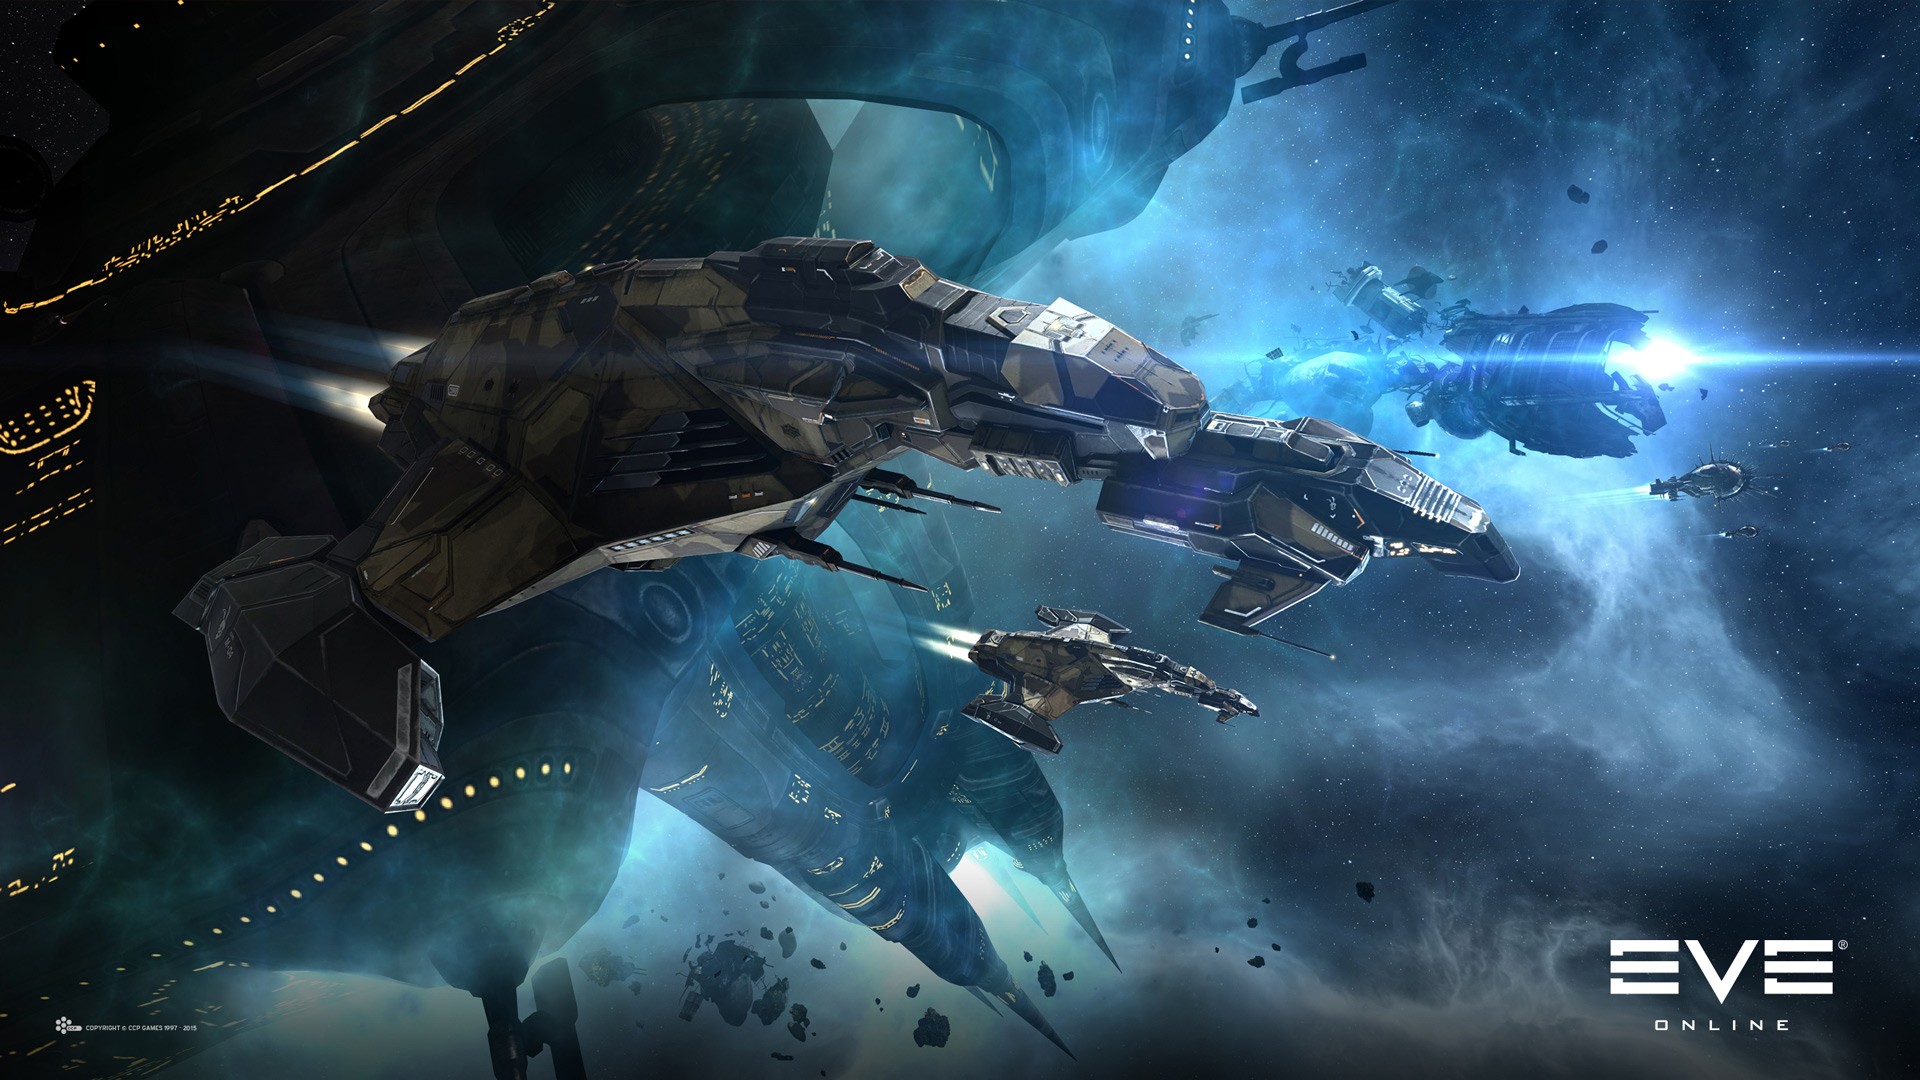 General 1920x1080 EVE Online PC gaming science fiction spaceship vehicle